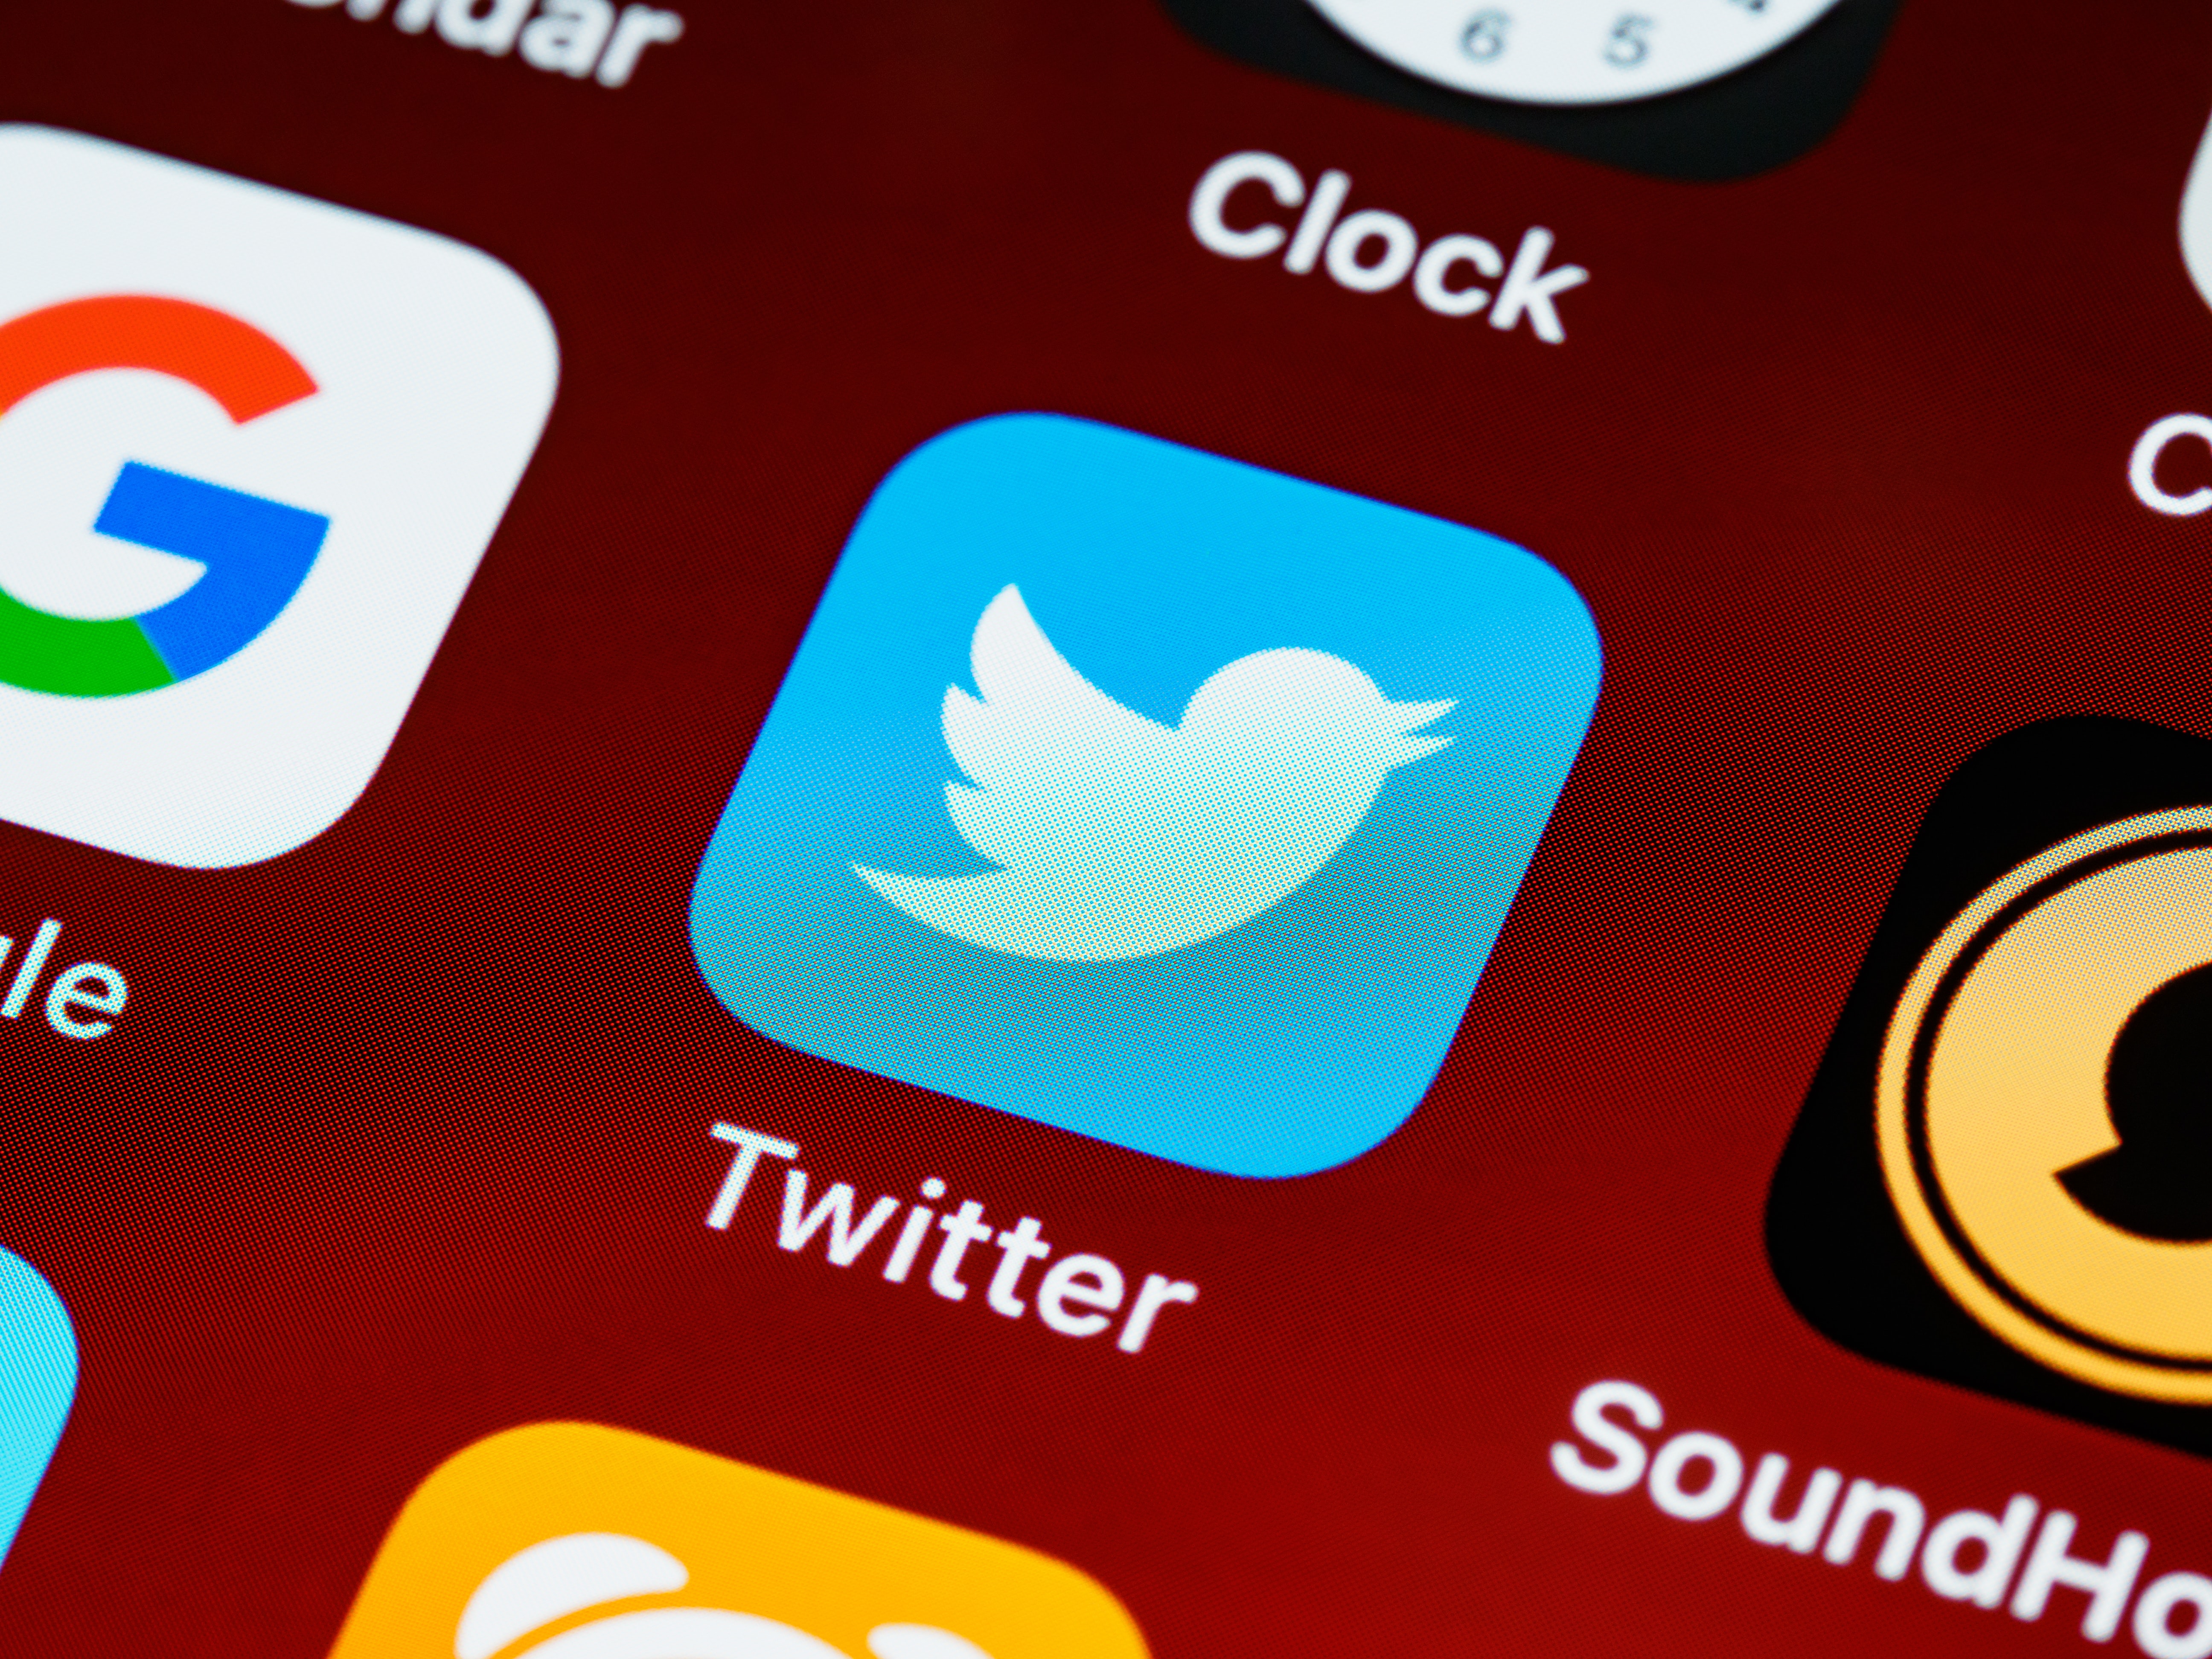 Why Twitter is prompting people to share tweet links instead of screenshots